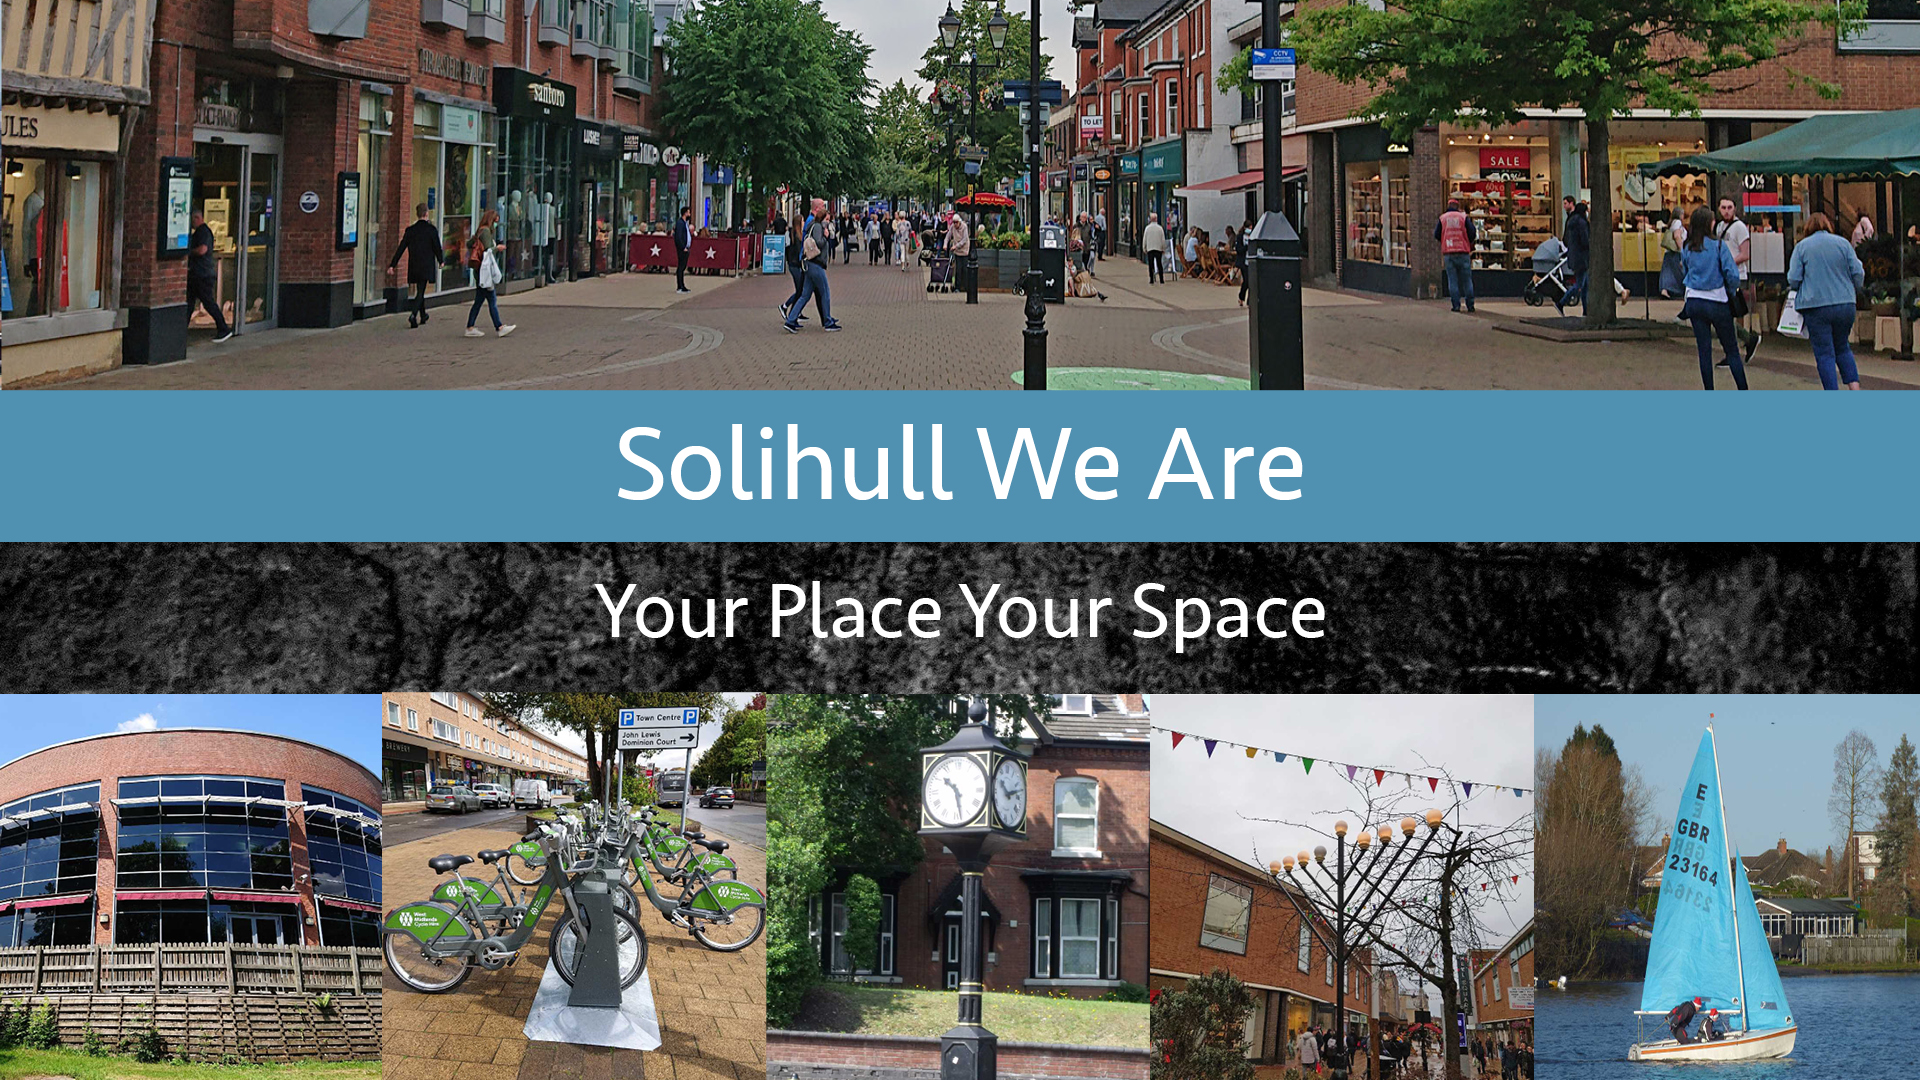 Solihull We Are